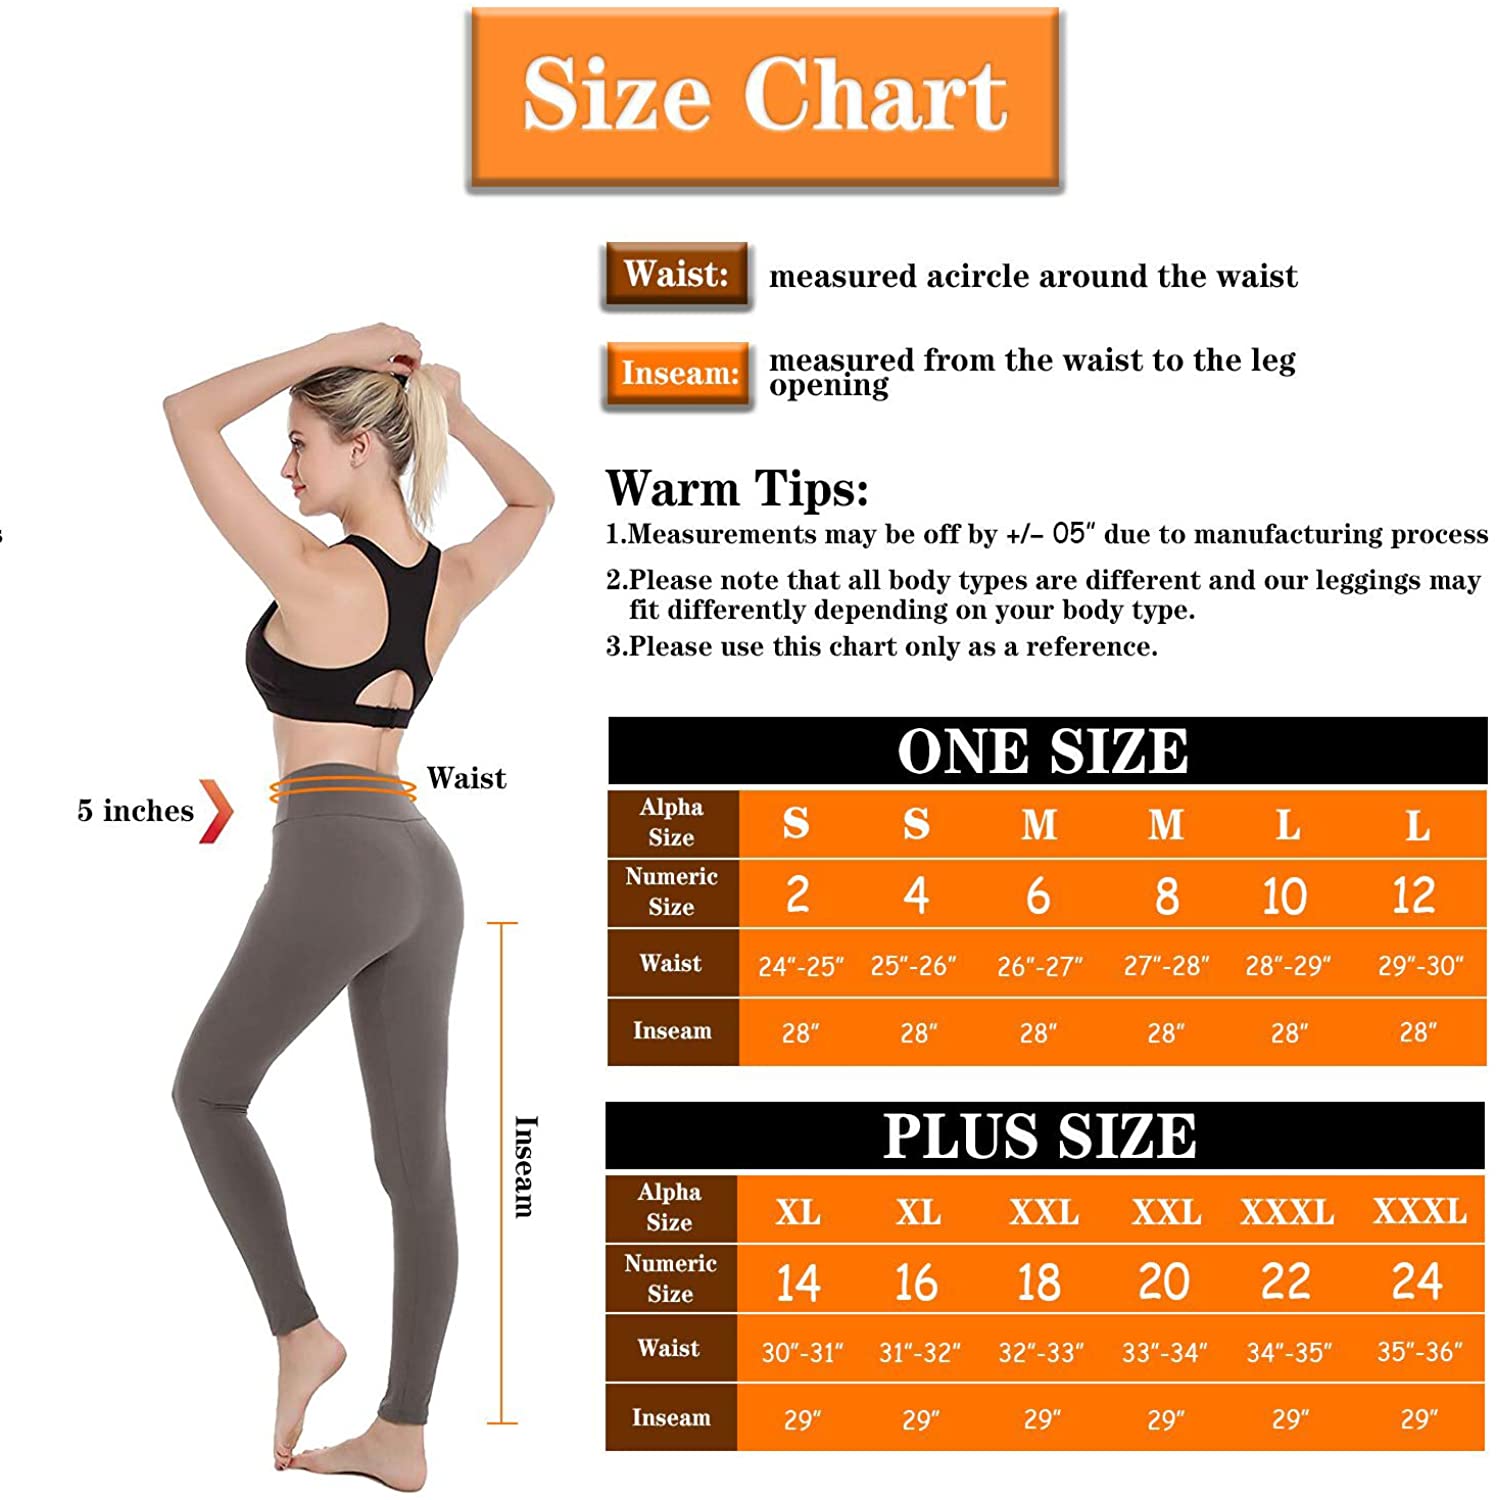 How to select Legging Size | Online shopping Size Guide |How to Select  Right Size Clothing on amazon - YouTube